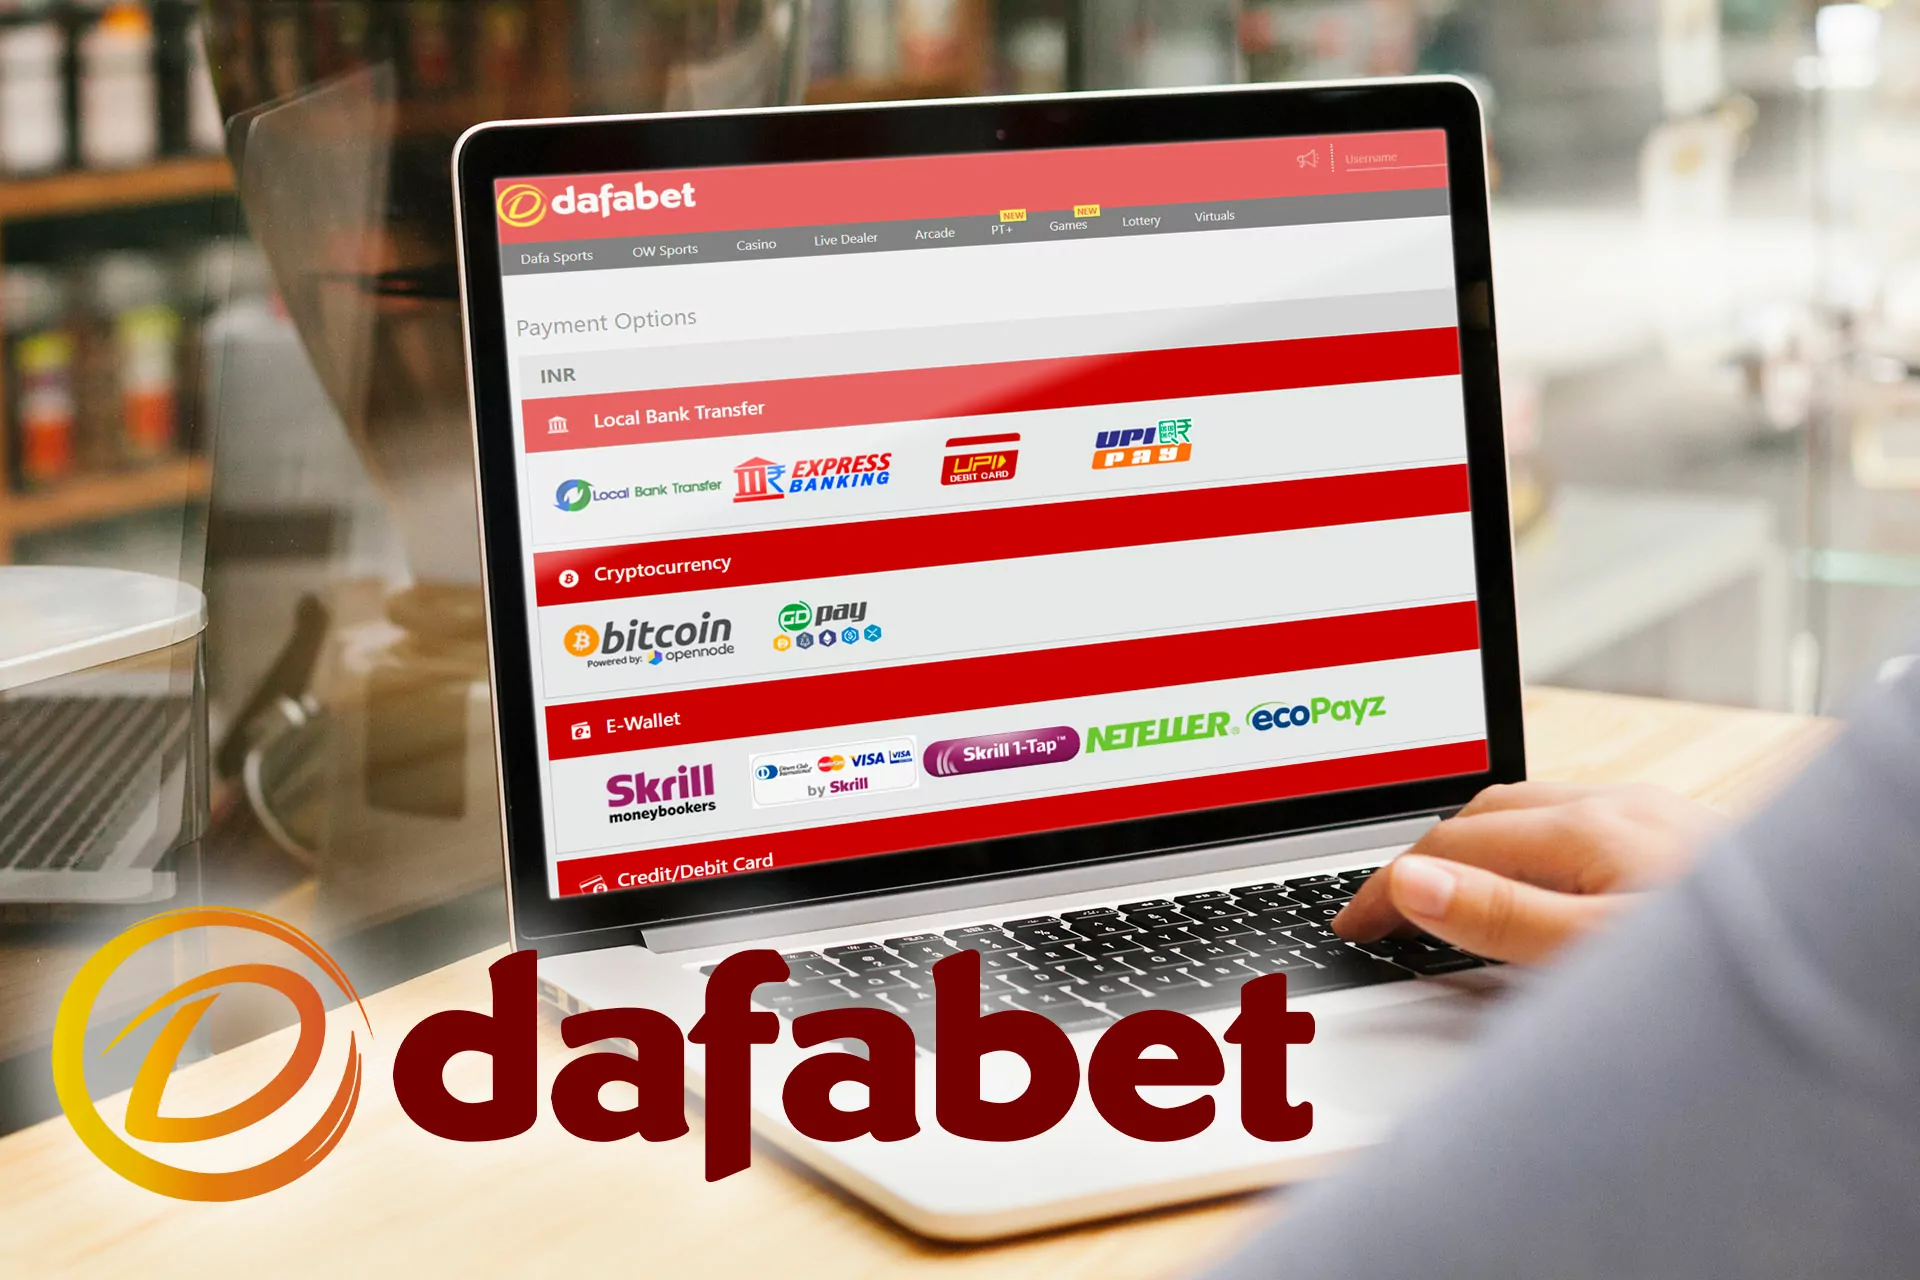 Read how to withdraw money from Dafabet.